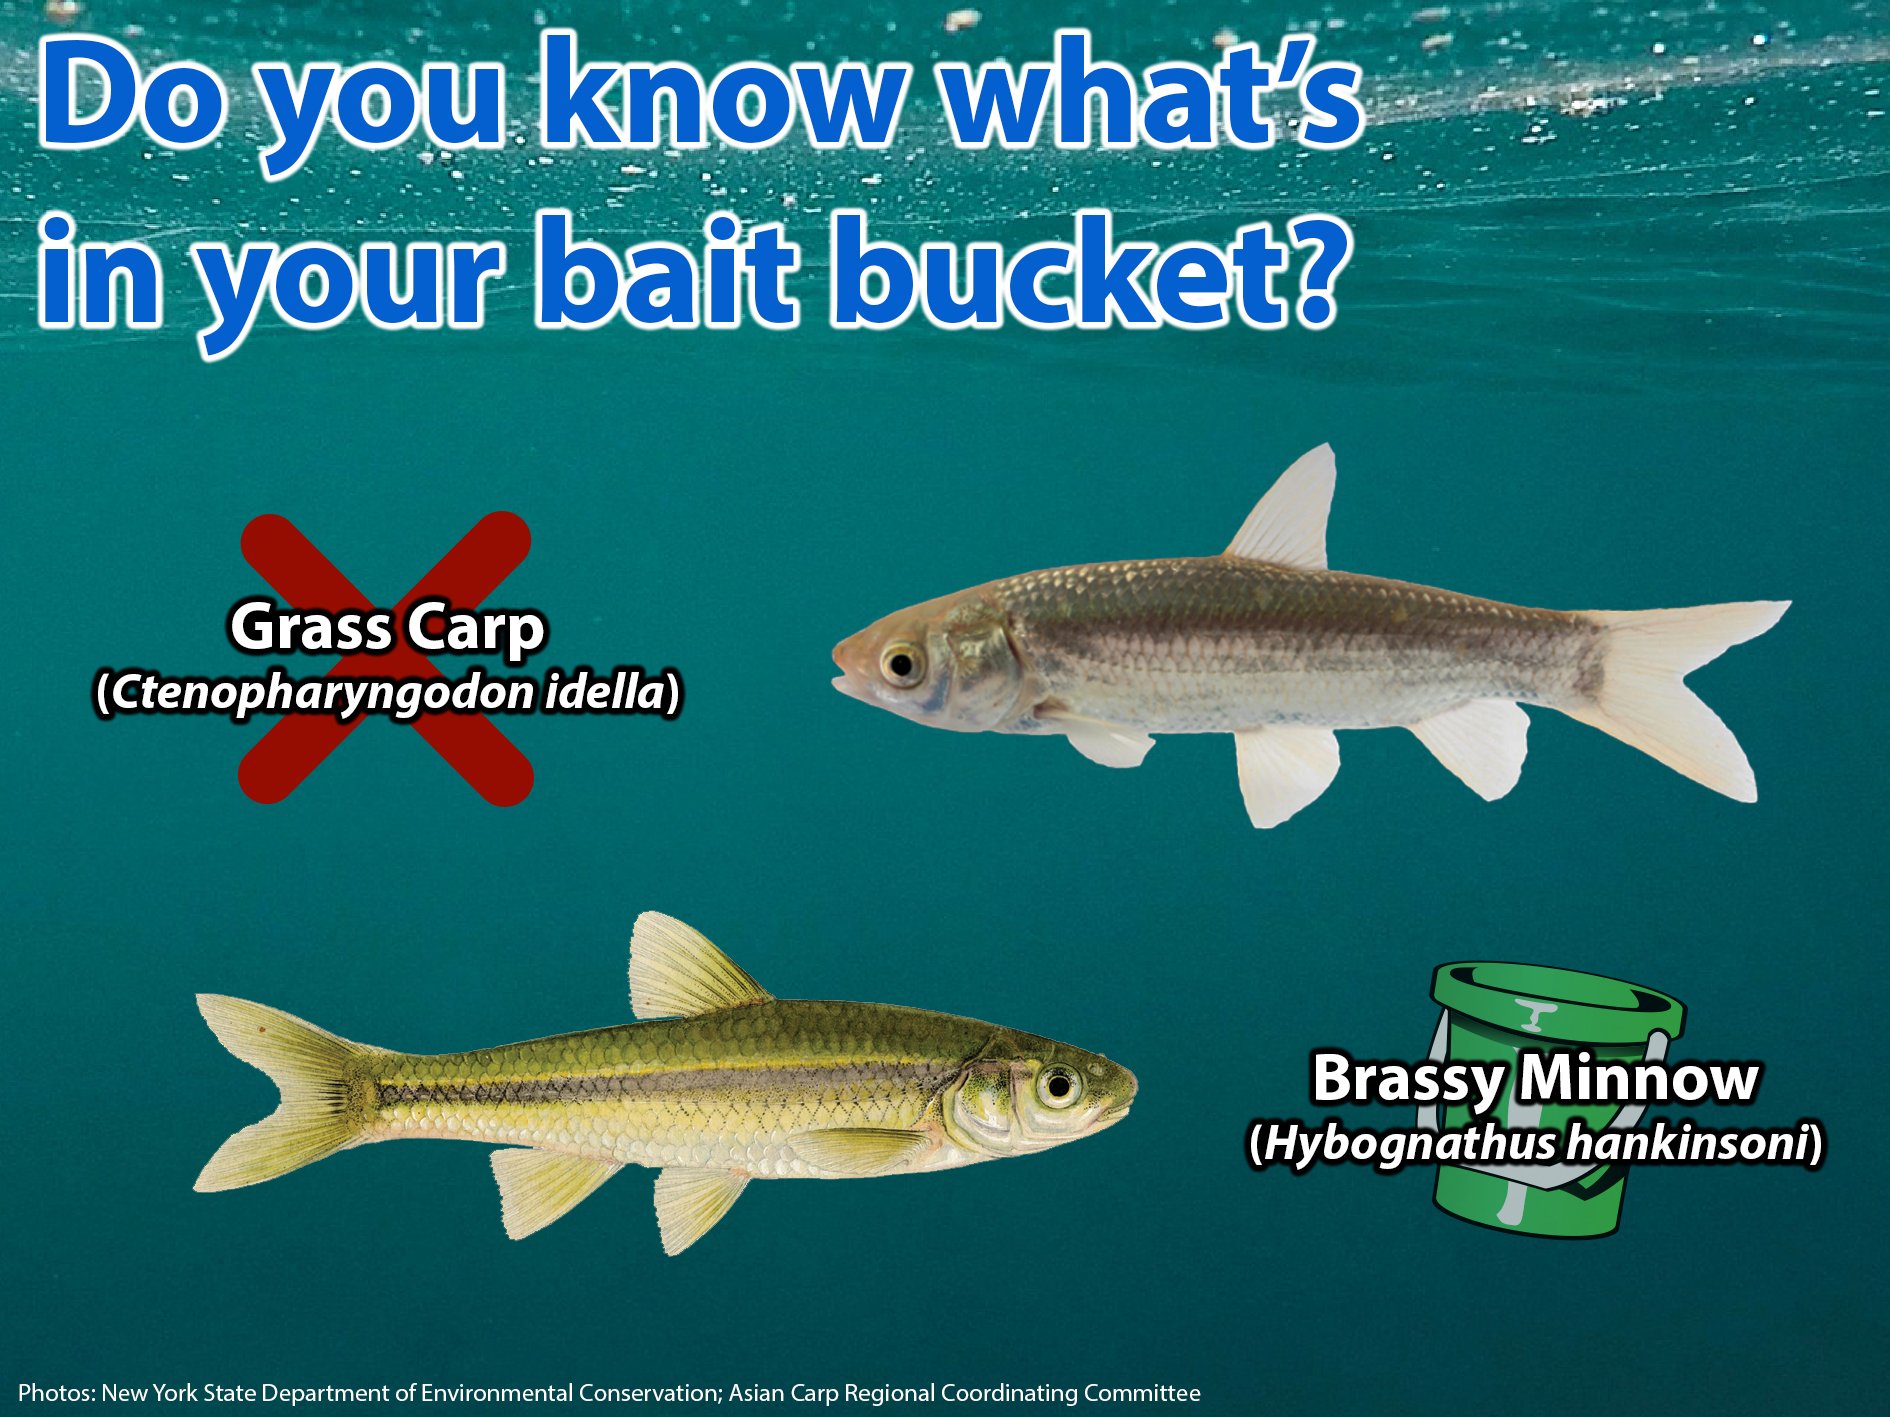 Invading Species on X: It can be difficult to tell legal baitfish apart  from invasive Asian carp juveniles, like the native Brassy Minnow and  invasive Grass Carp. This is why it's important